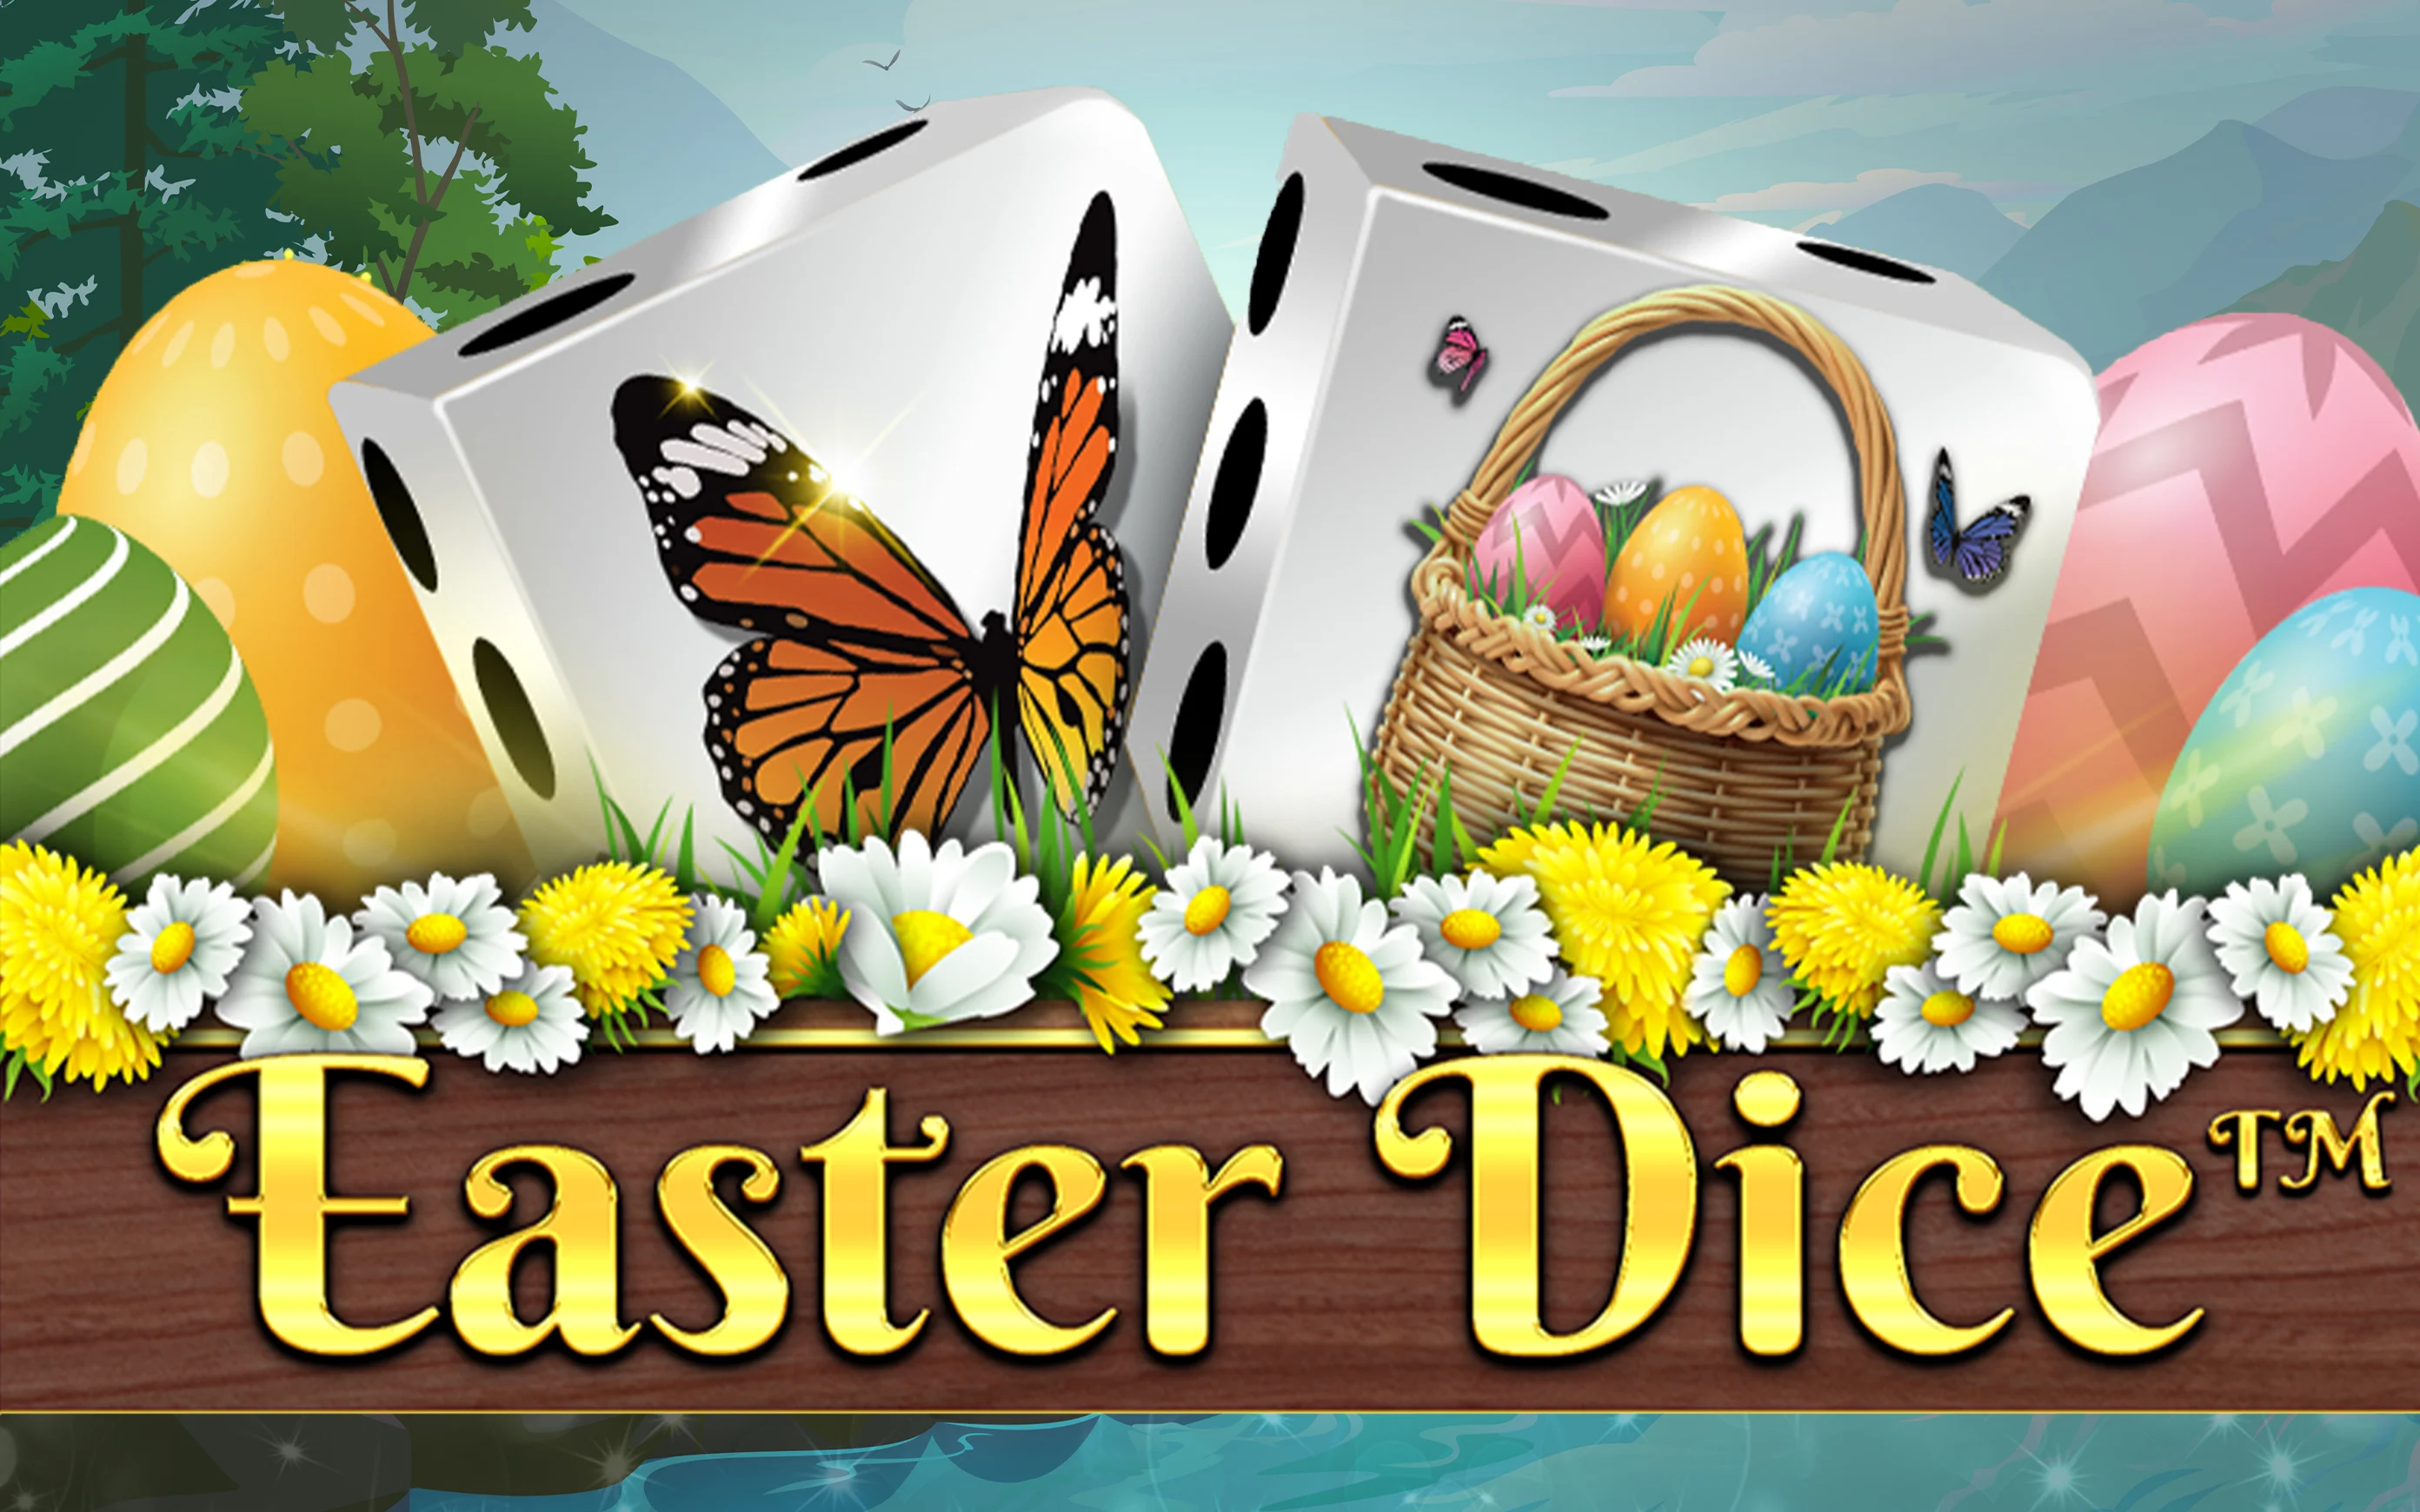 Play Easter Dice on Starcasino.be online casino